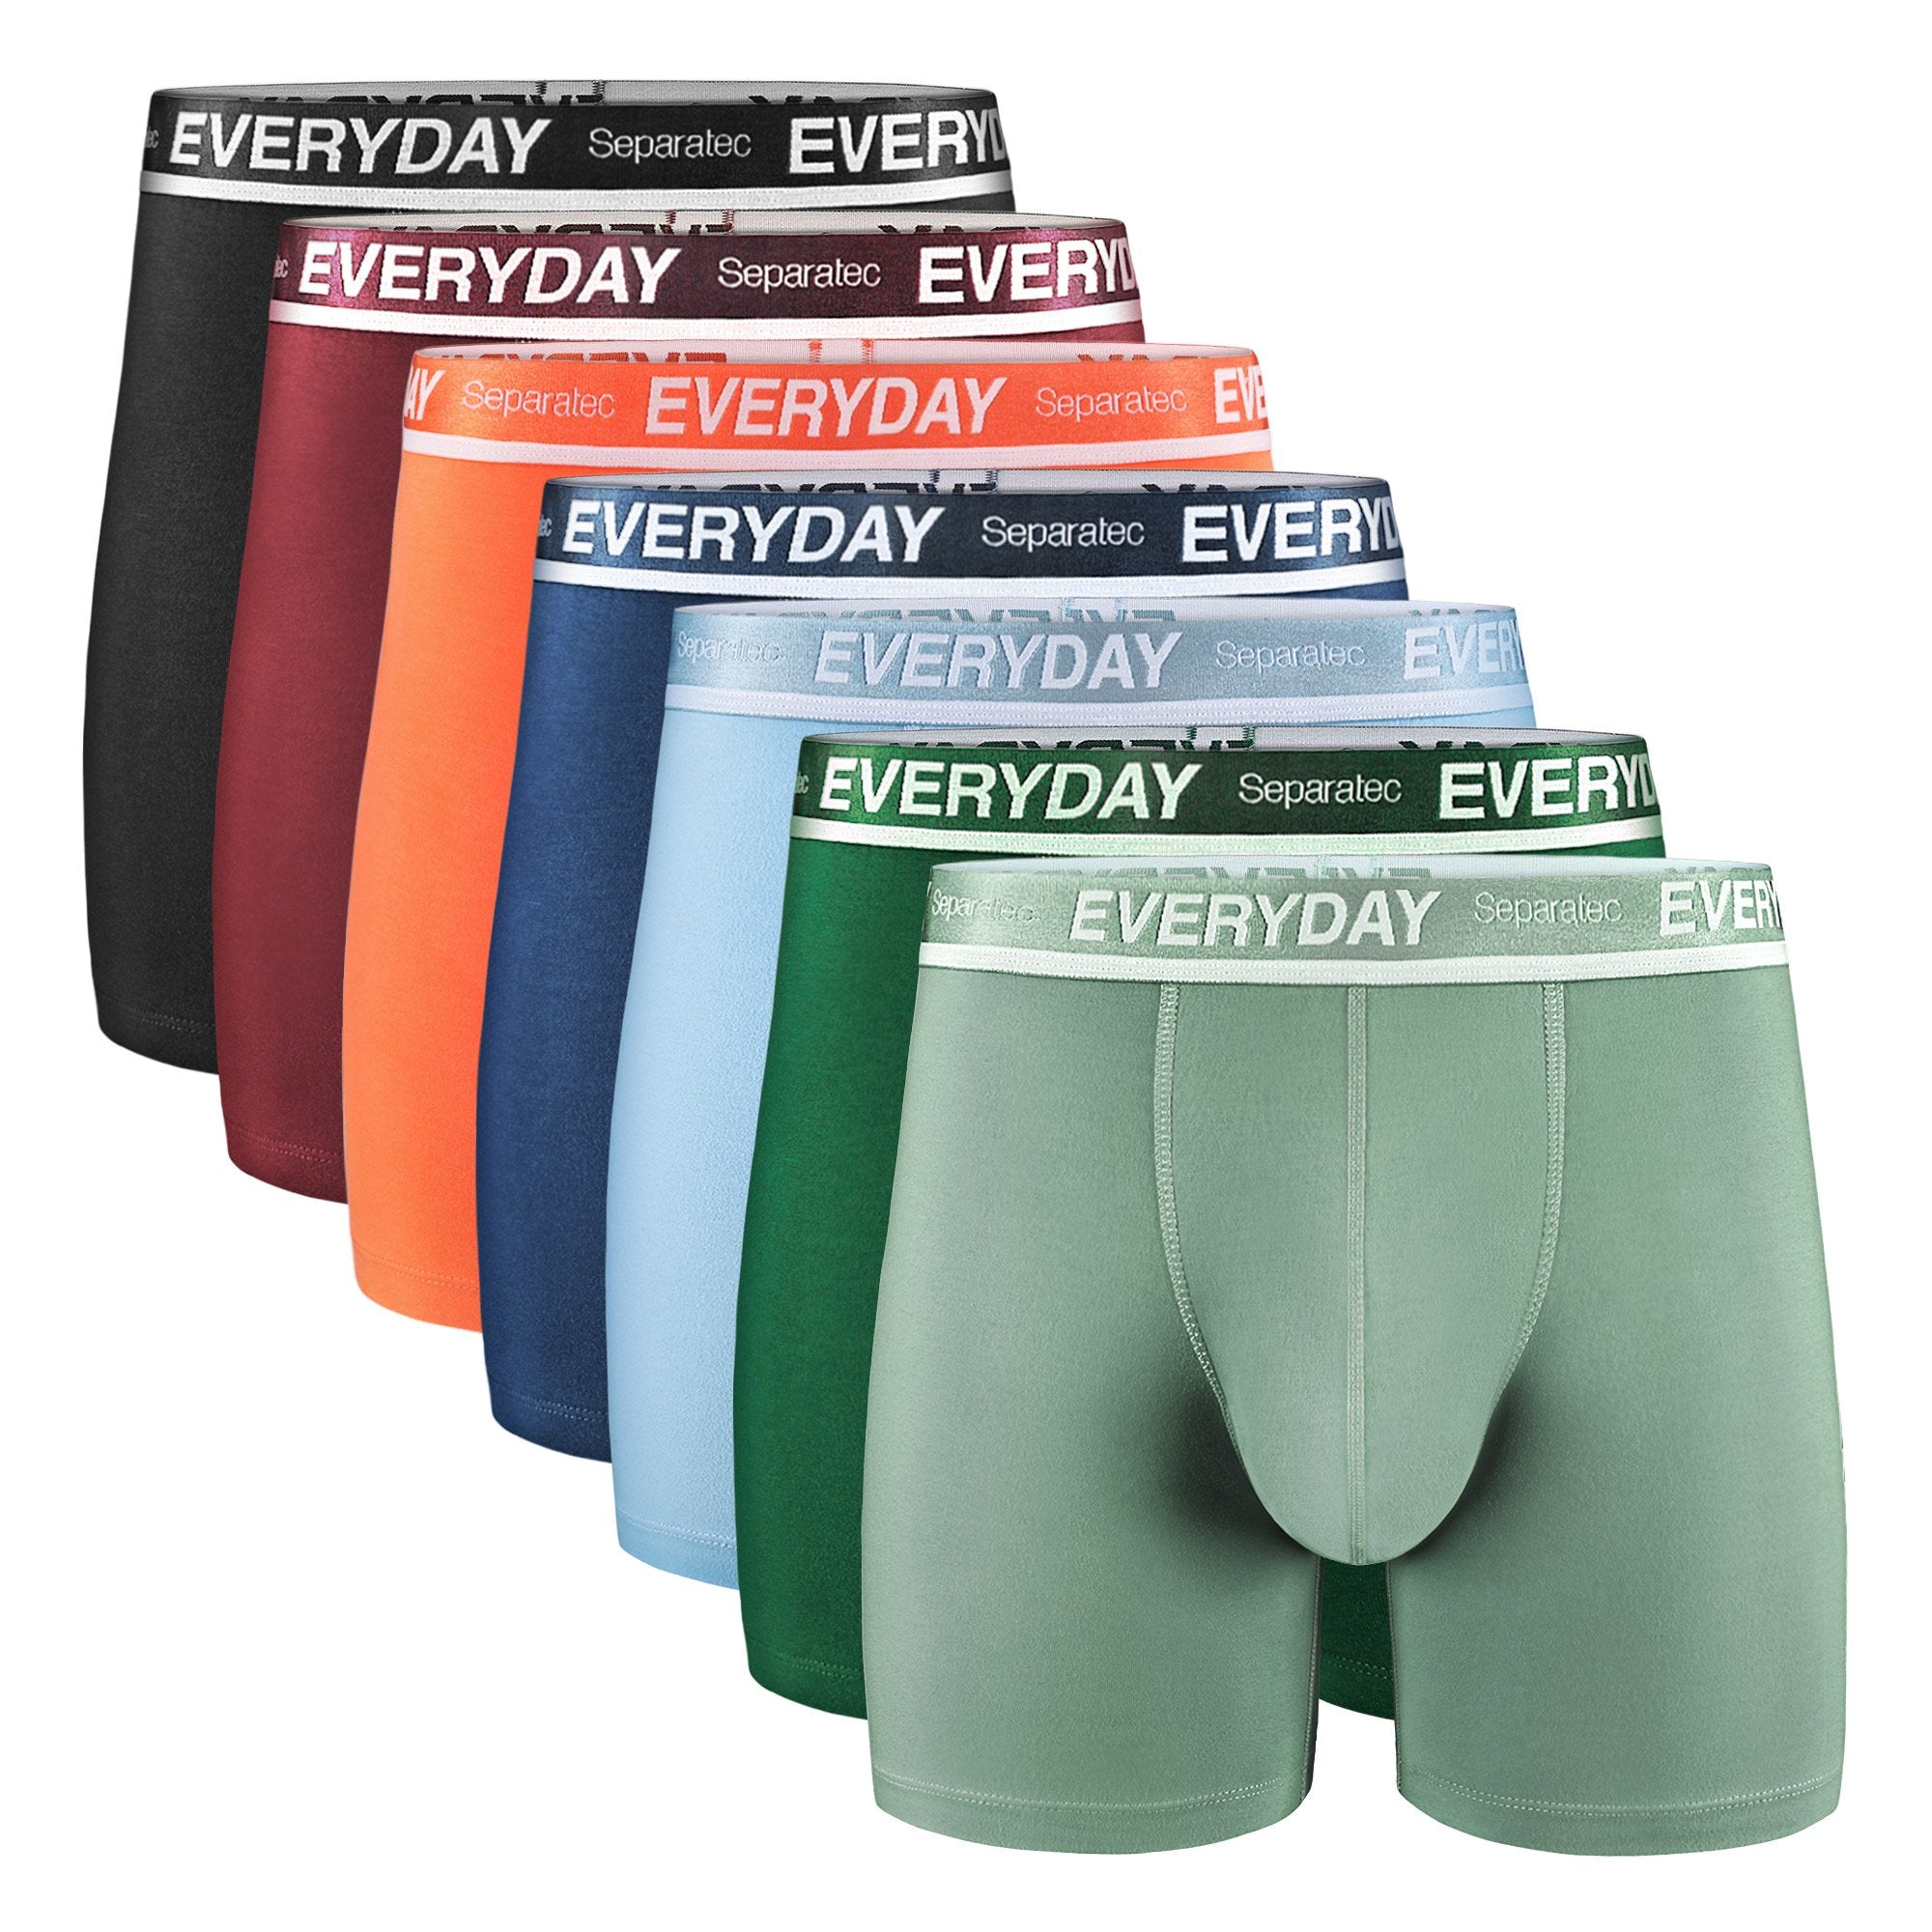 Separatec Underwear for Men  With Separate Pouch Technology So You Stay  Fresh, Keep Dry, Do More